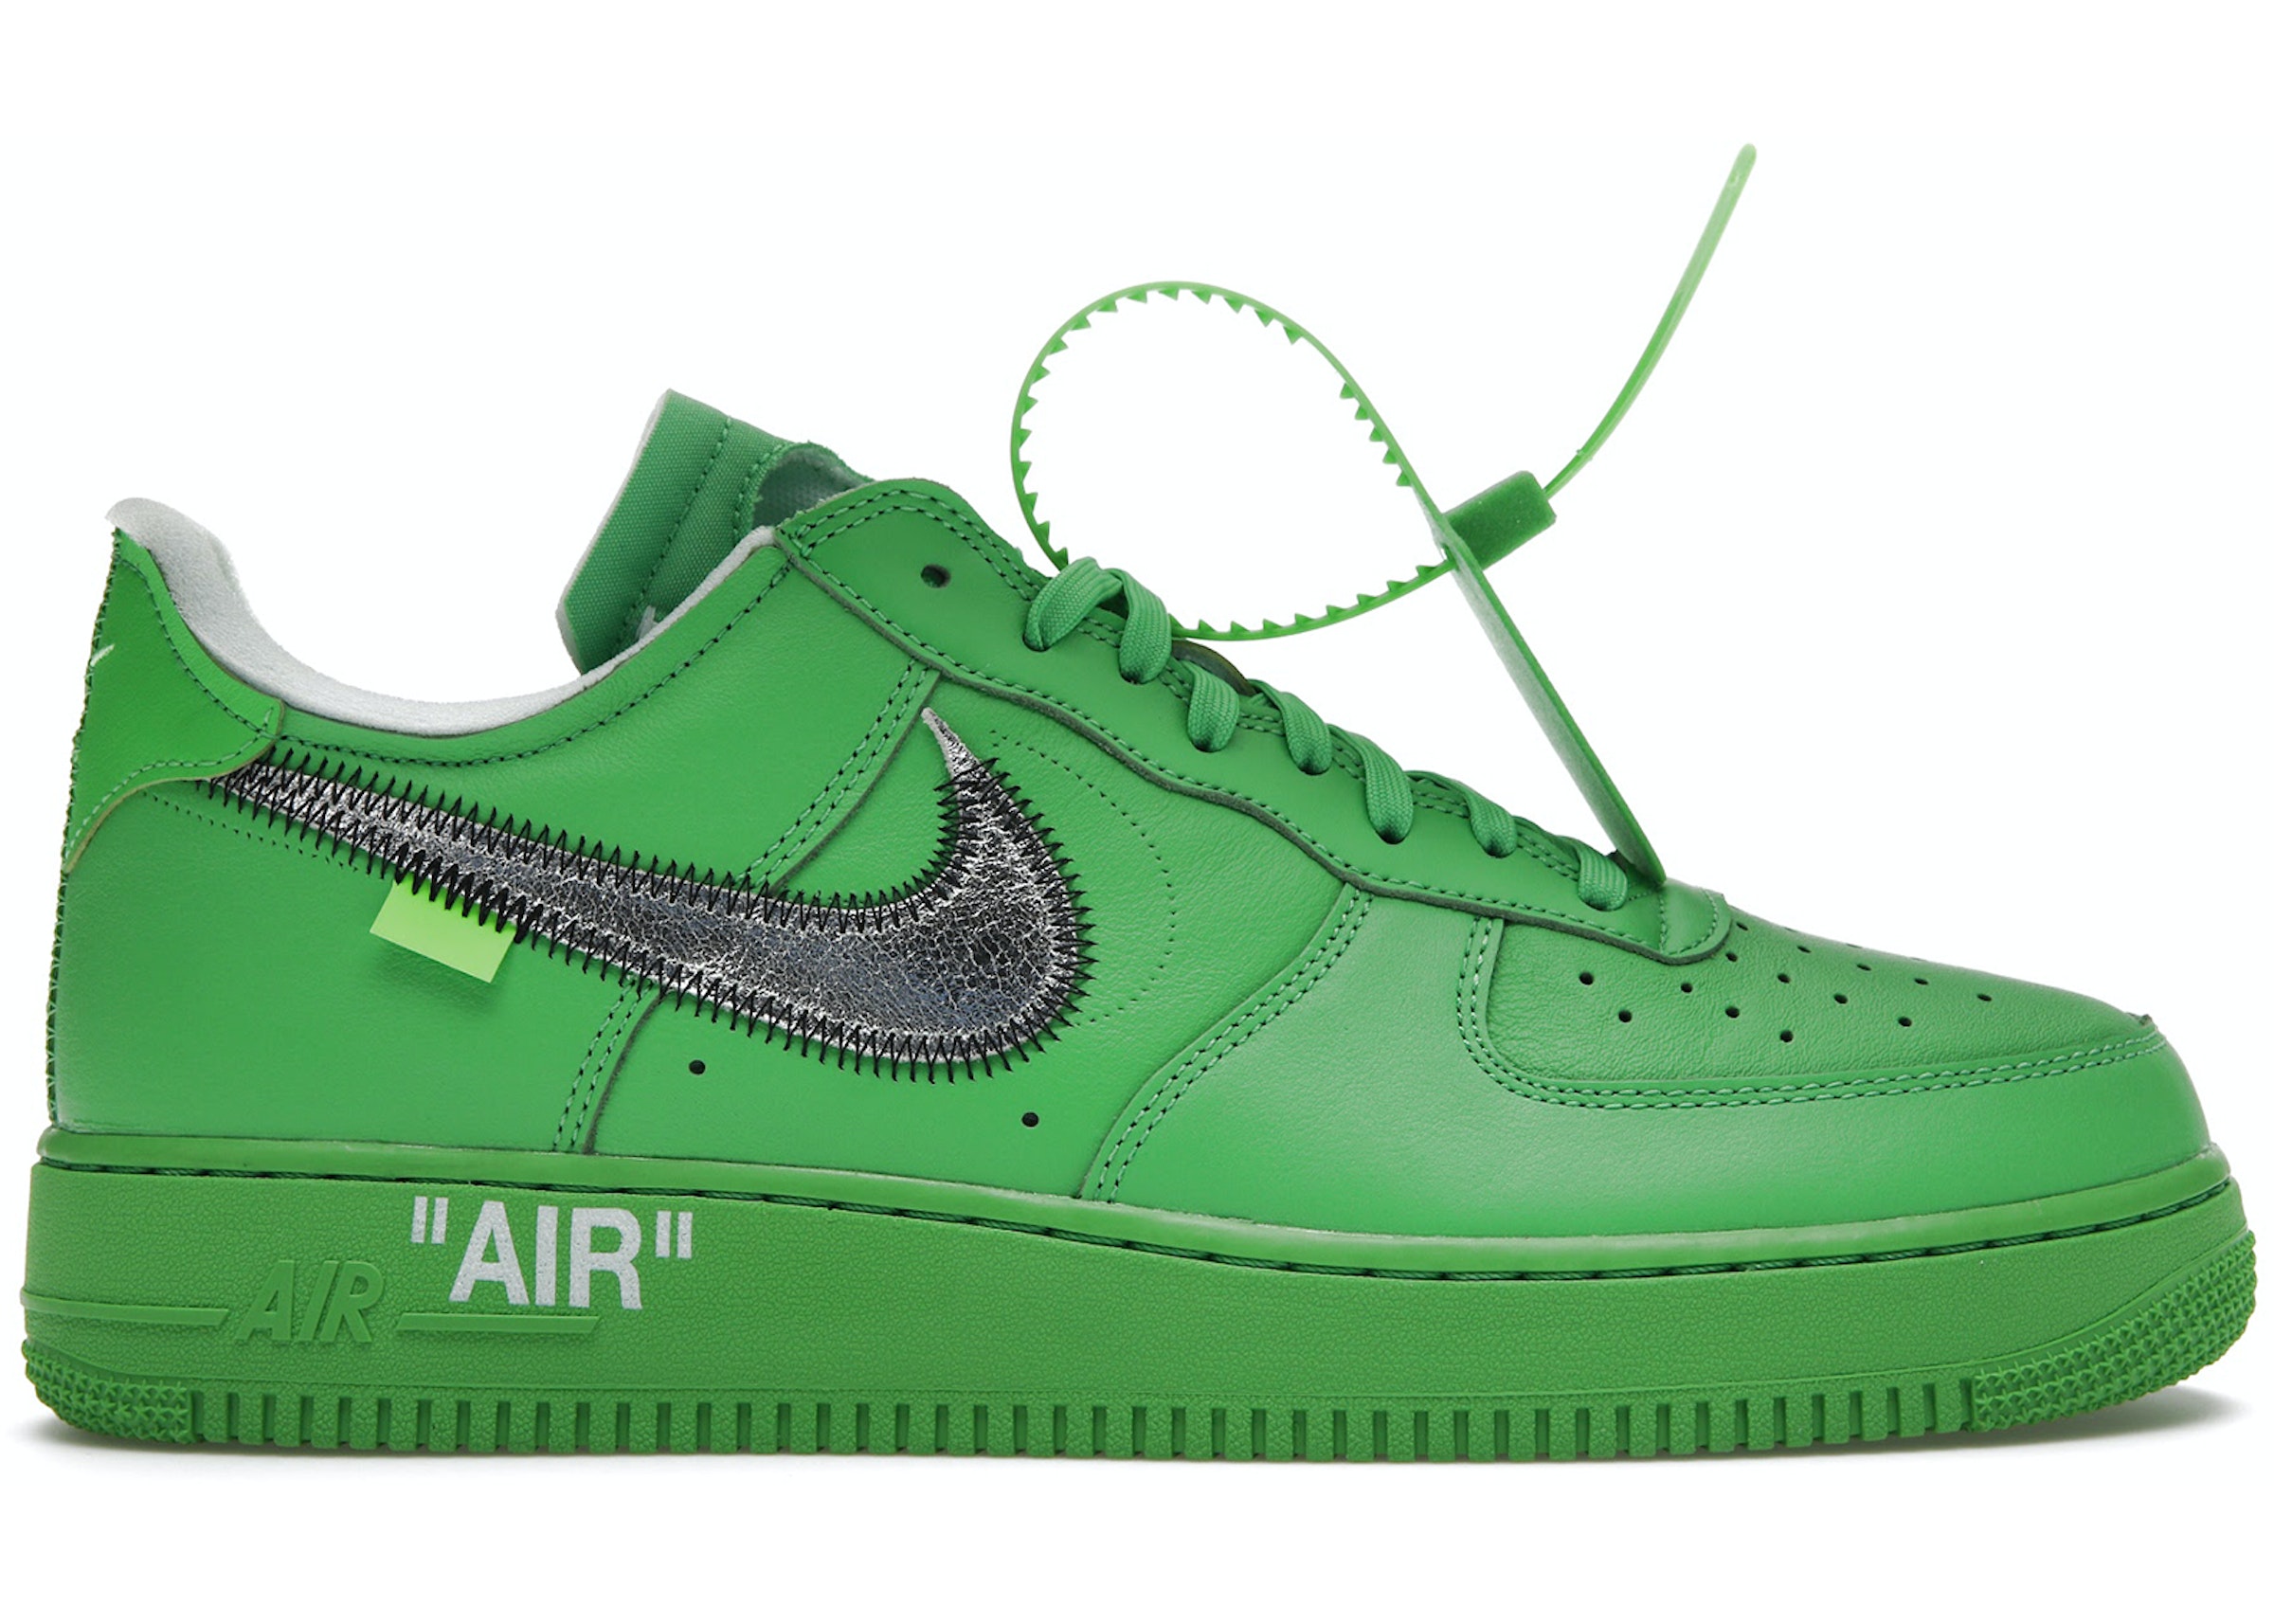 Nike Air Force 1 Low Off-White Men's - DX1419-300 - US